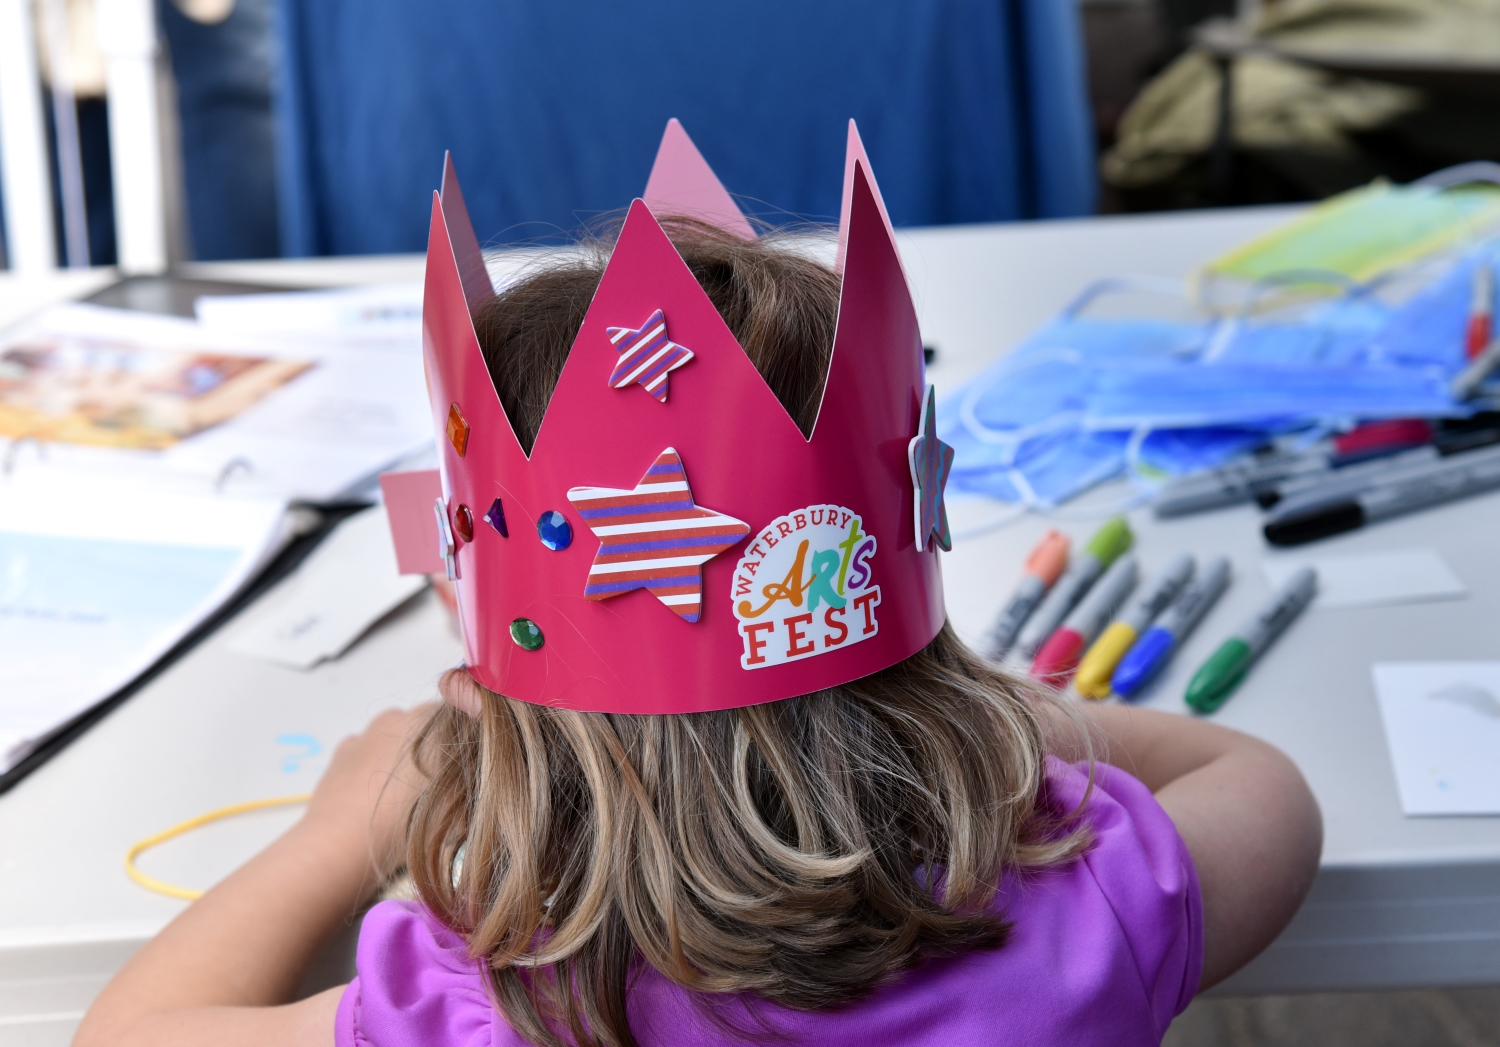 Kid at an activity station with a Waterbury Arts Fest crown